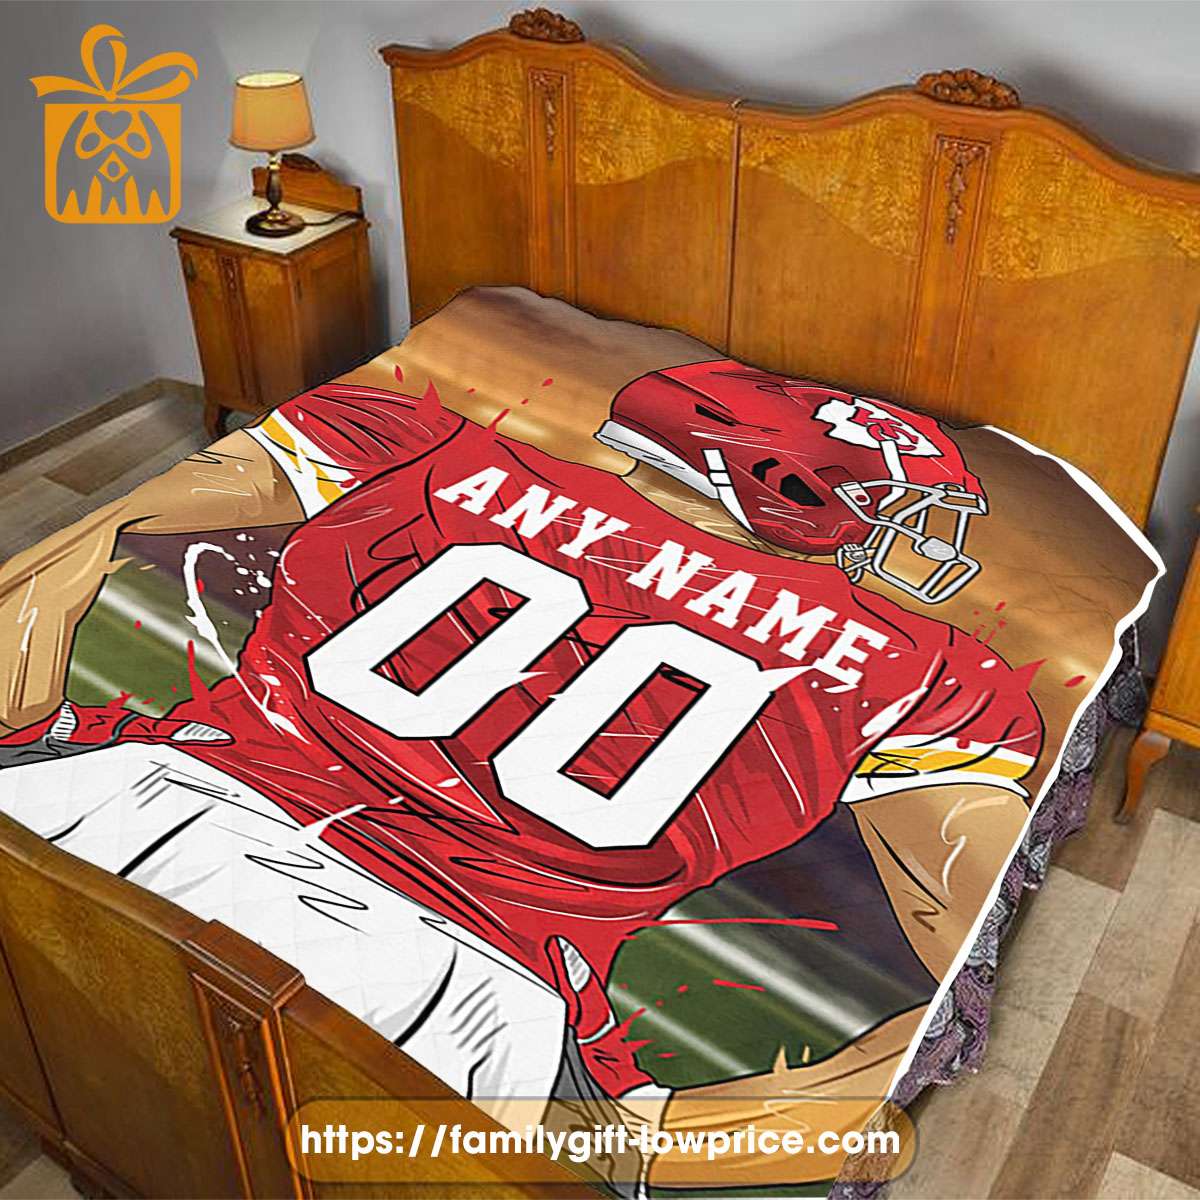 Kansas City Chiefs Blanket - Personalized NFL Blanket with Custom Name & Number | Unique Fan Gift